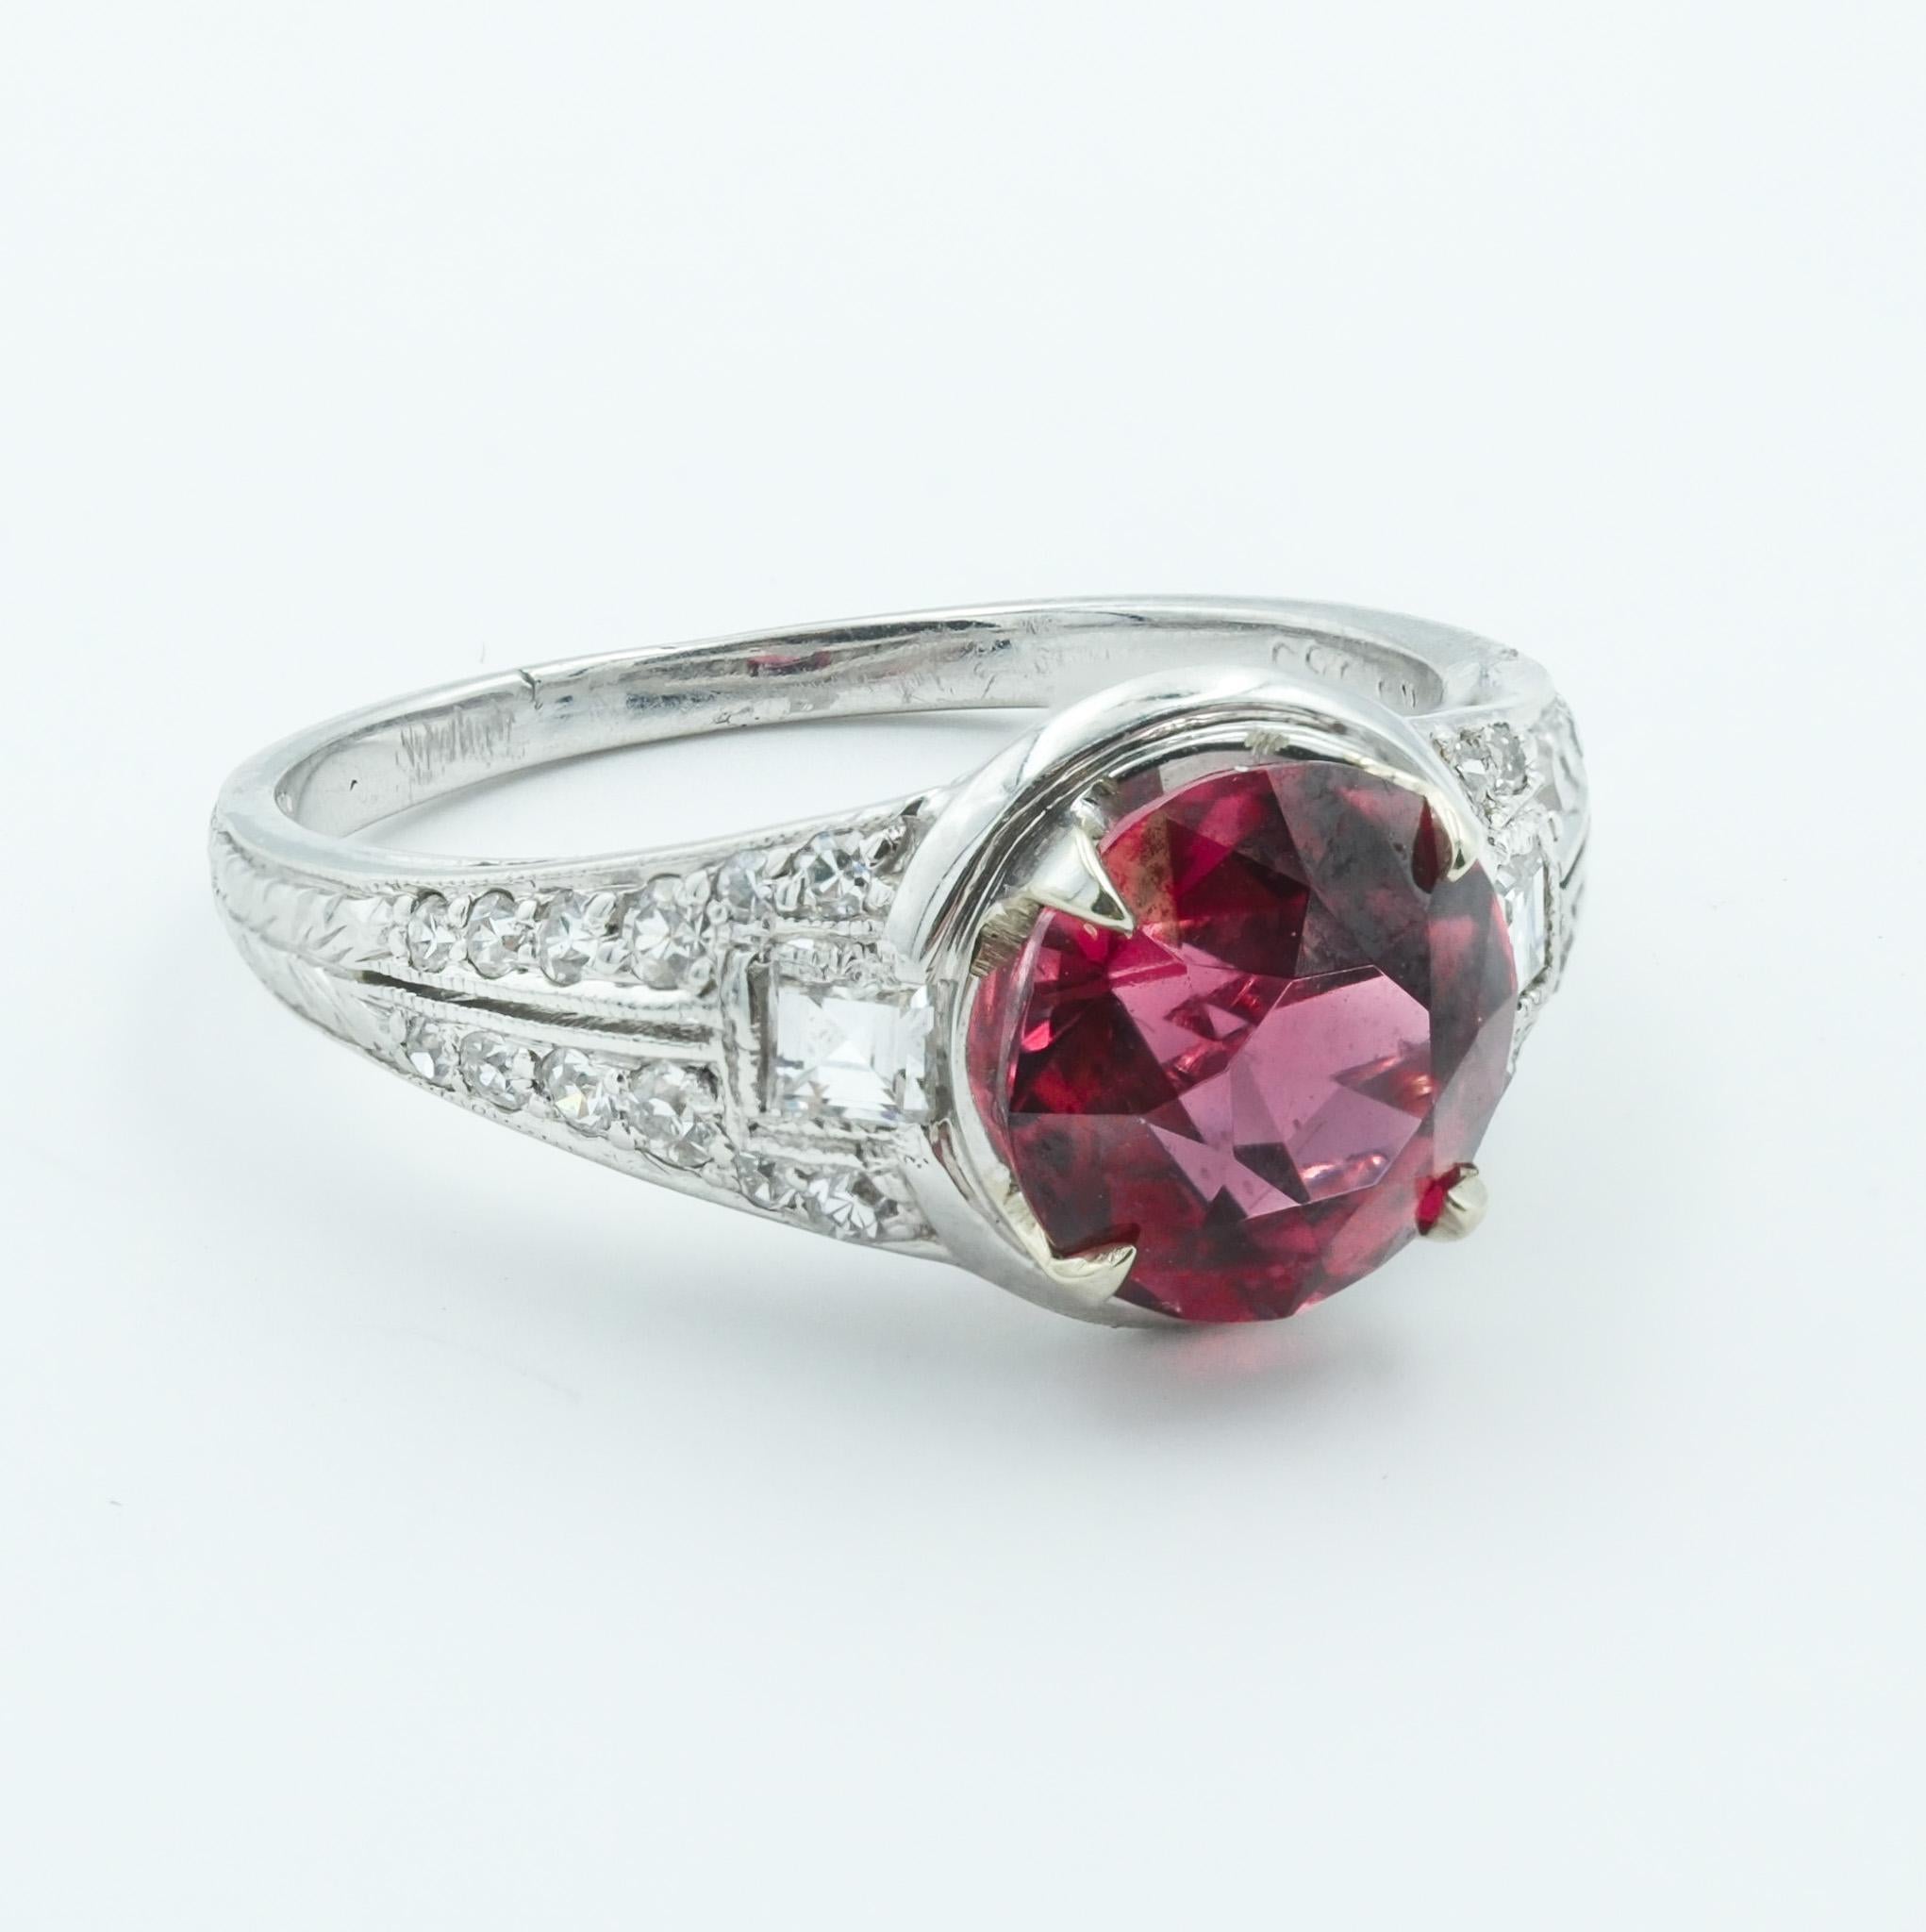 Single Cut Art Deco Platinum Ring With Natural 2.07ct Spinel and Diamonds c1920's For Sale